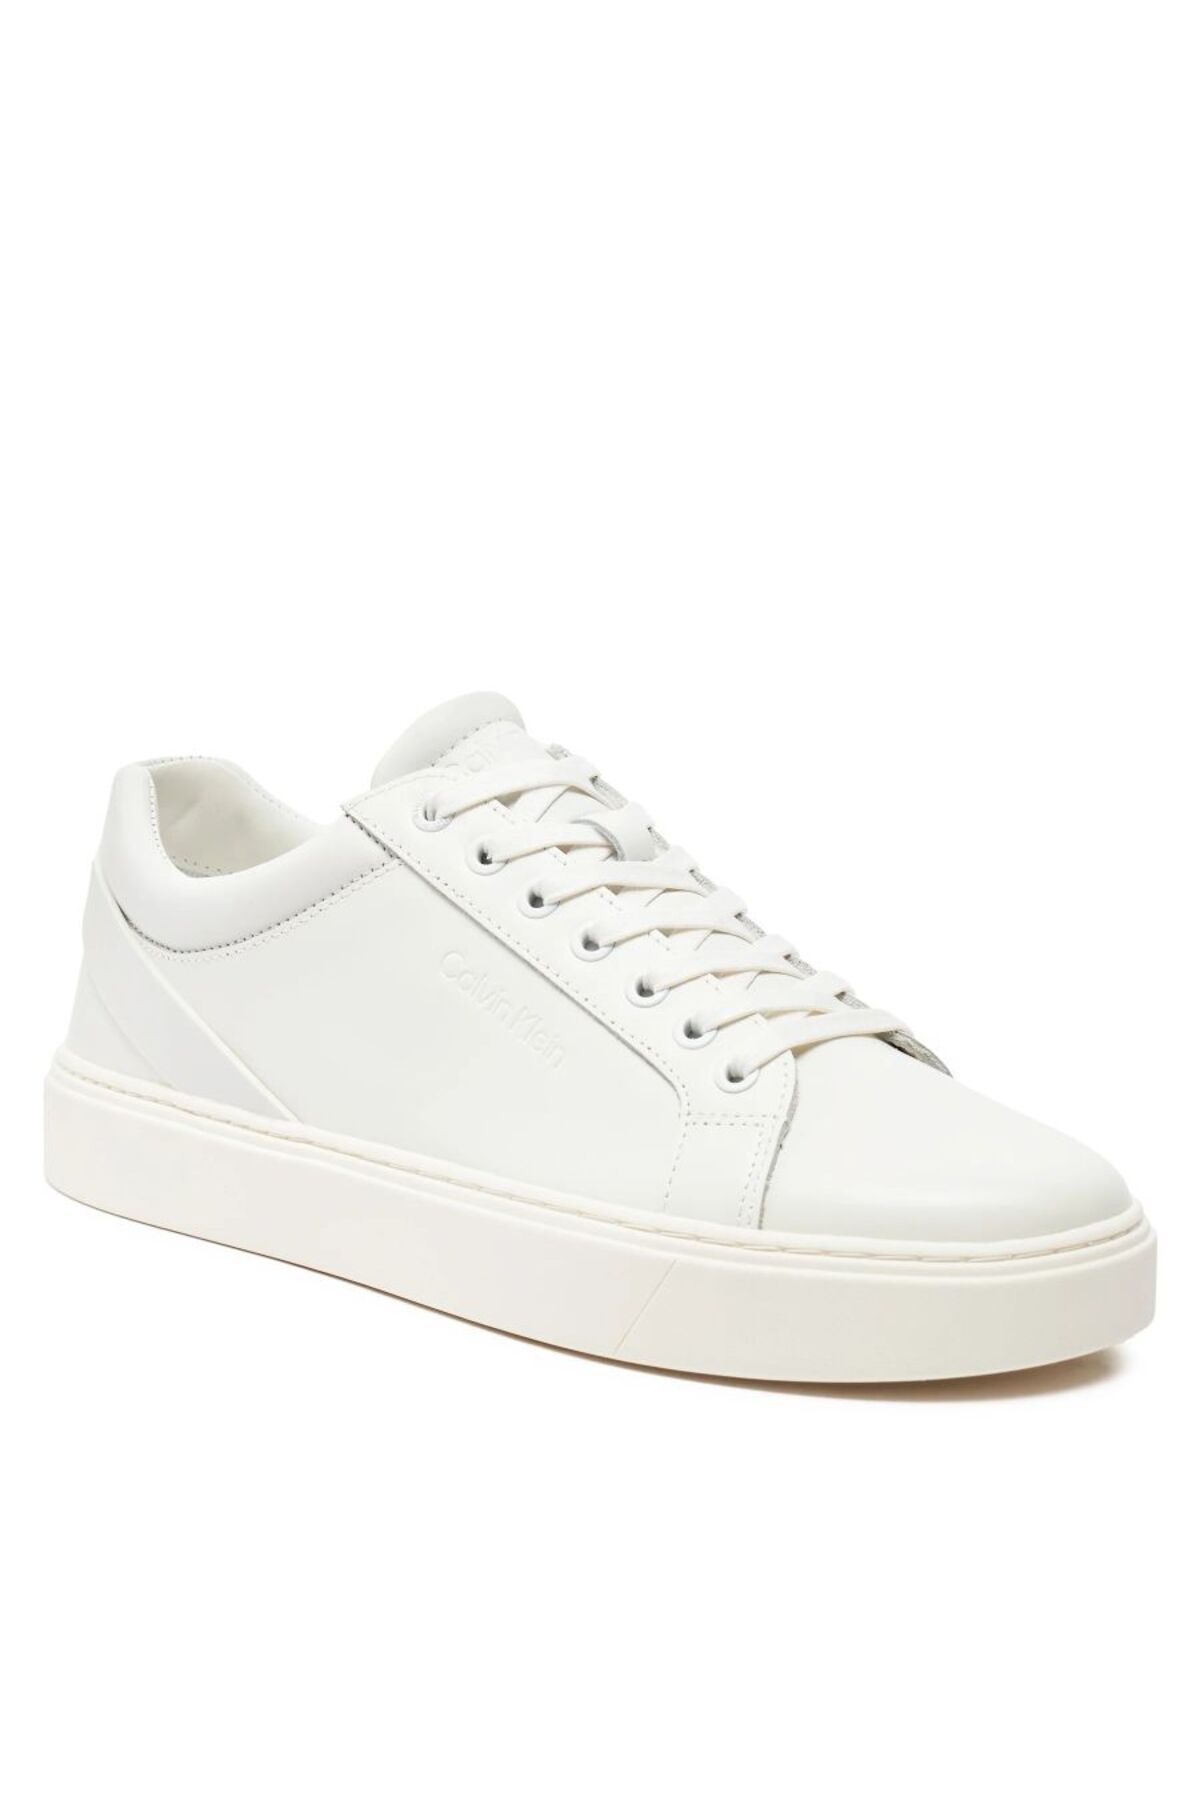 Calvin Klein LOW TOP LACE UP ARCHIVE STRIPE